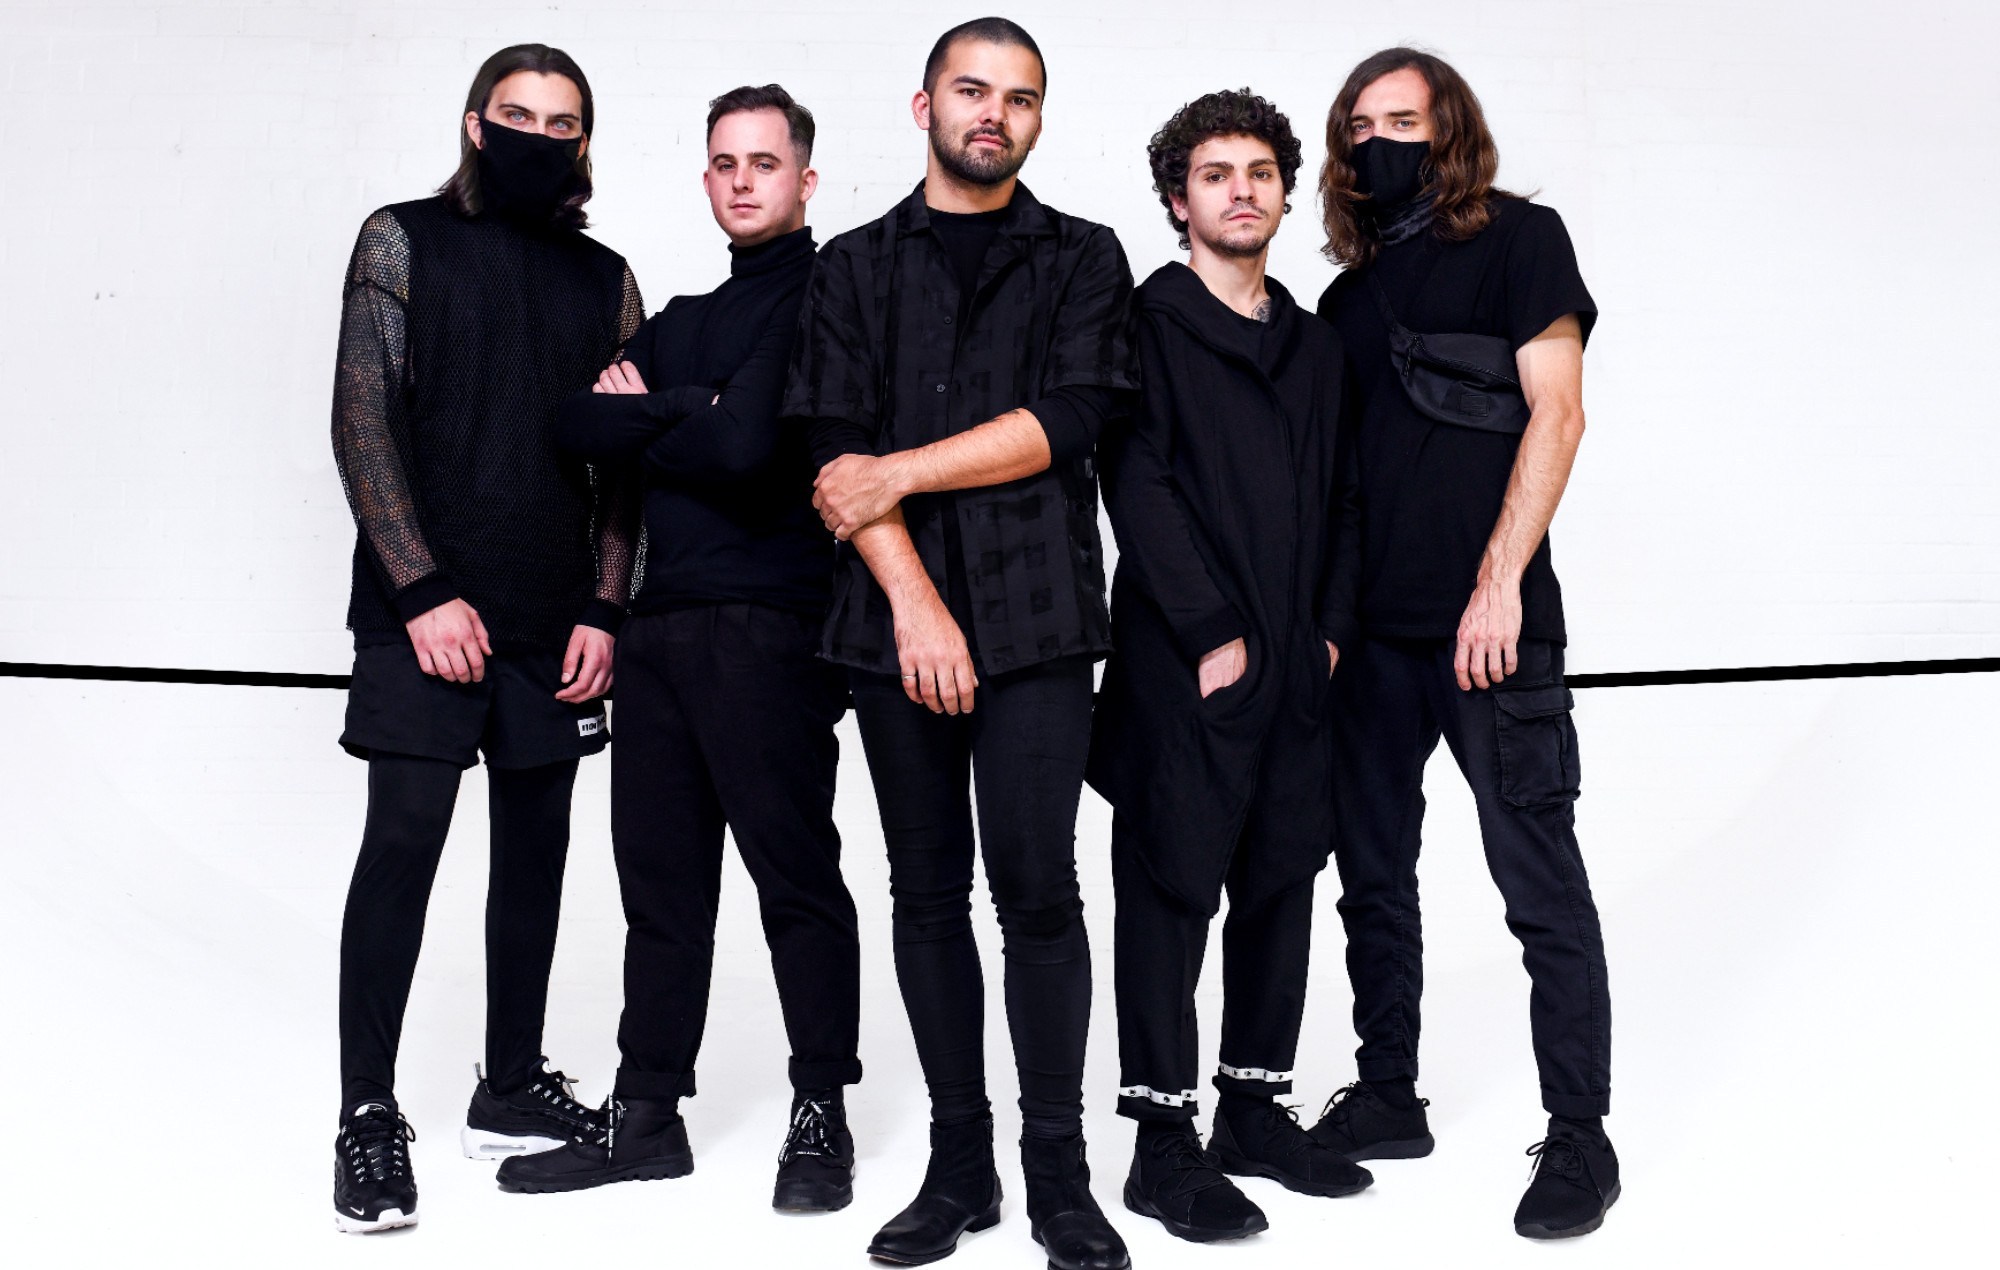 WATCH NORTHLANE PERFORM “DETAILS MATTER” FROM ‘LIVE AT THE ROUNDHOUSE’ STREAM